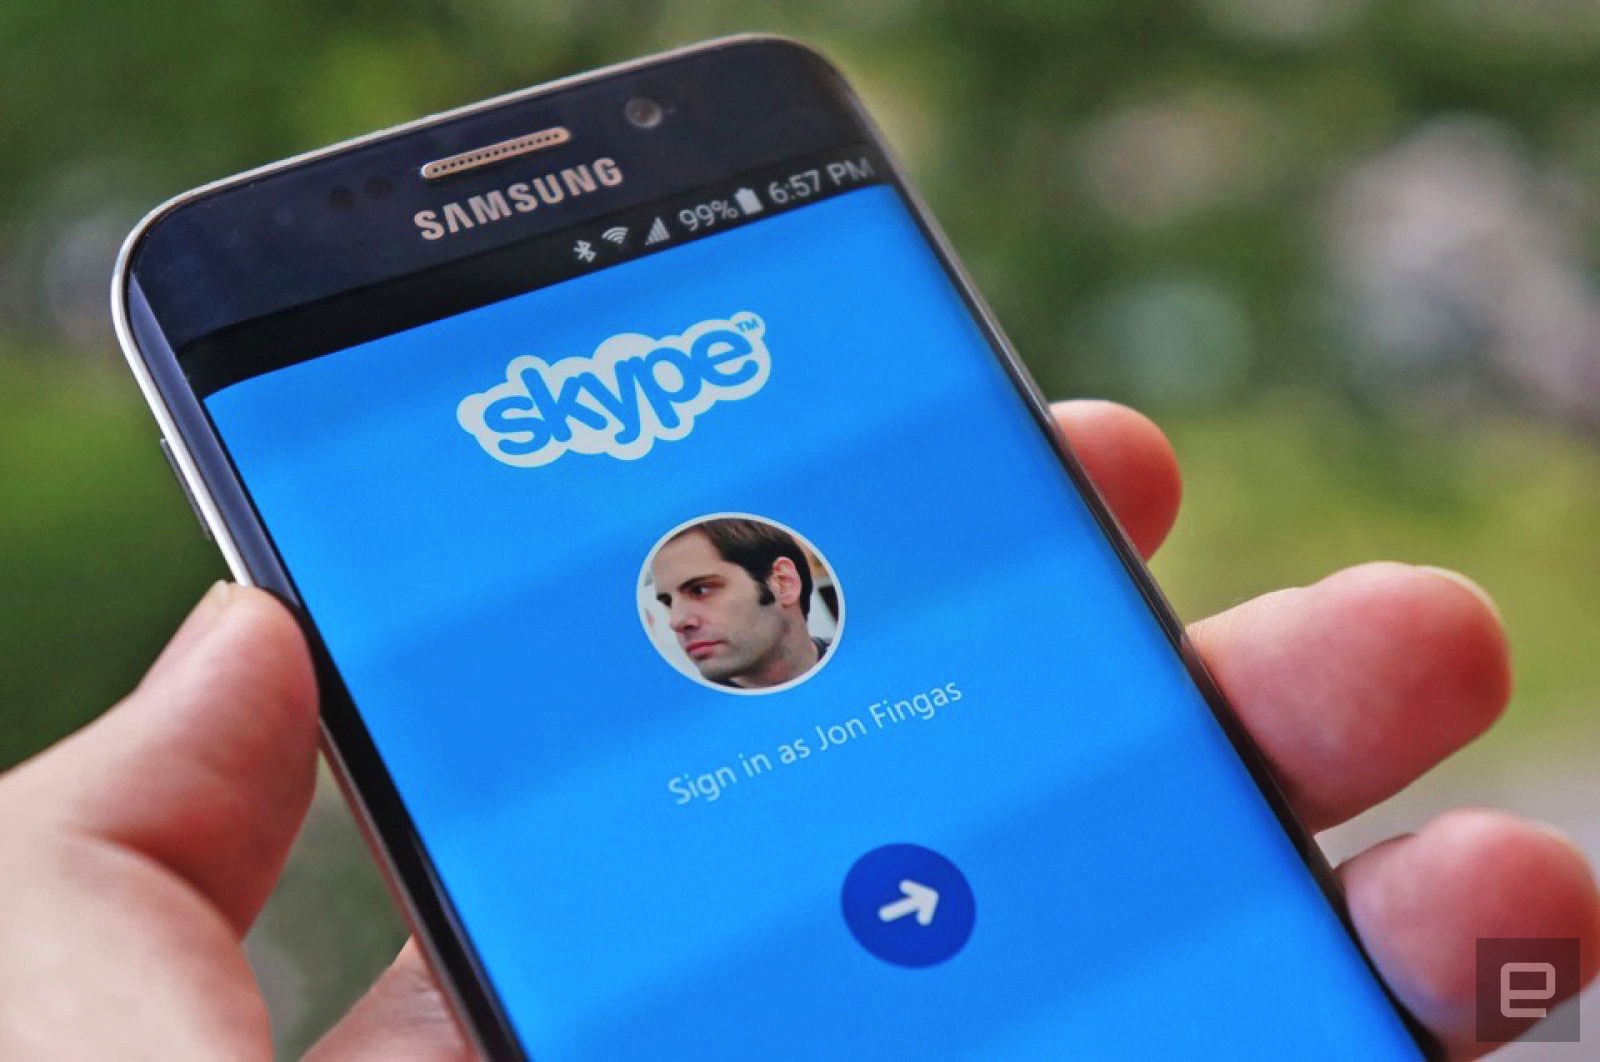 Skype no longer supporting Windows Phone or older Android versions